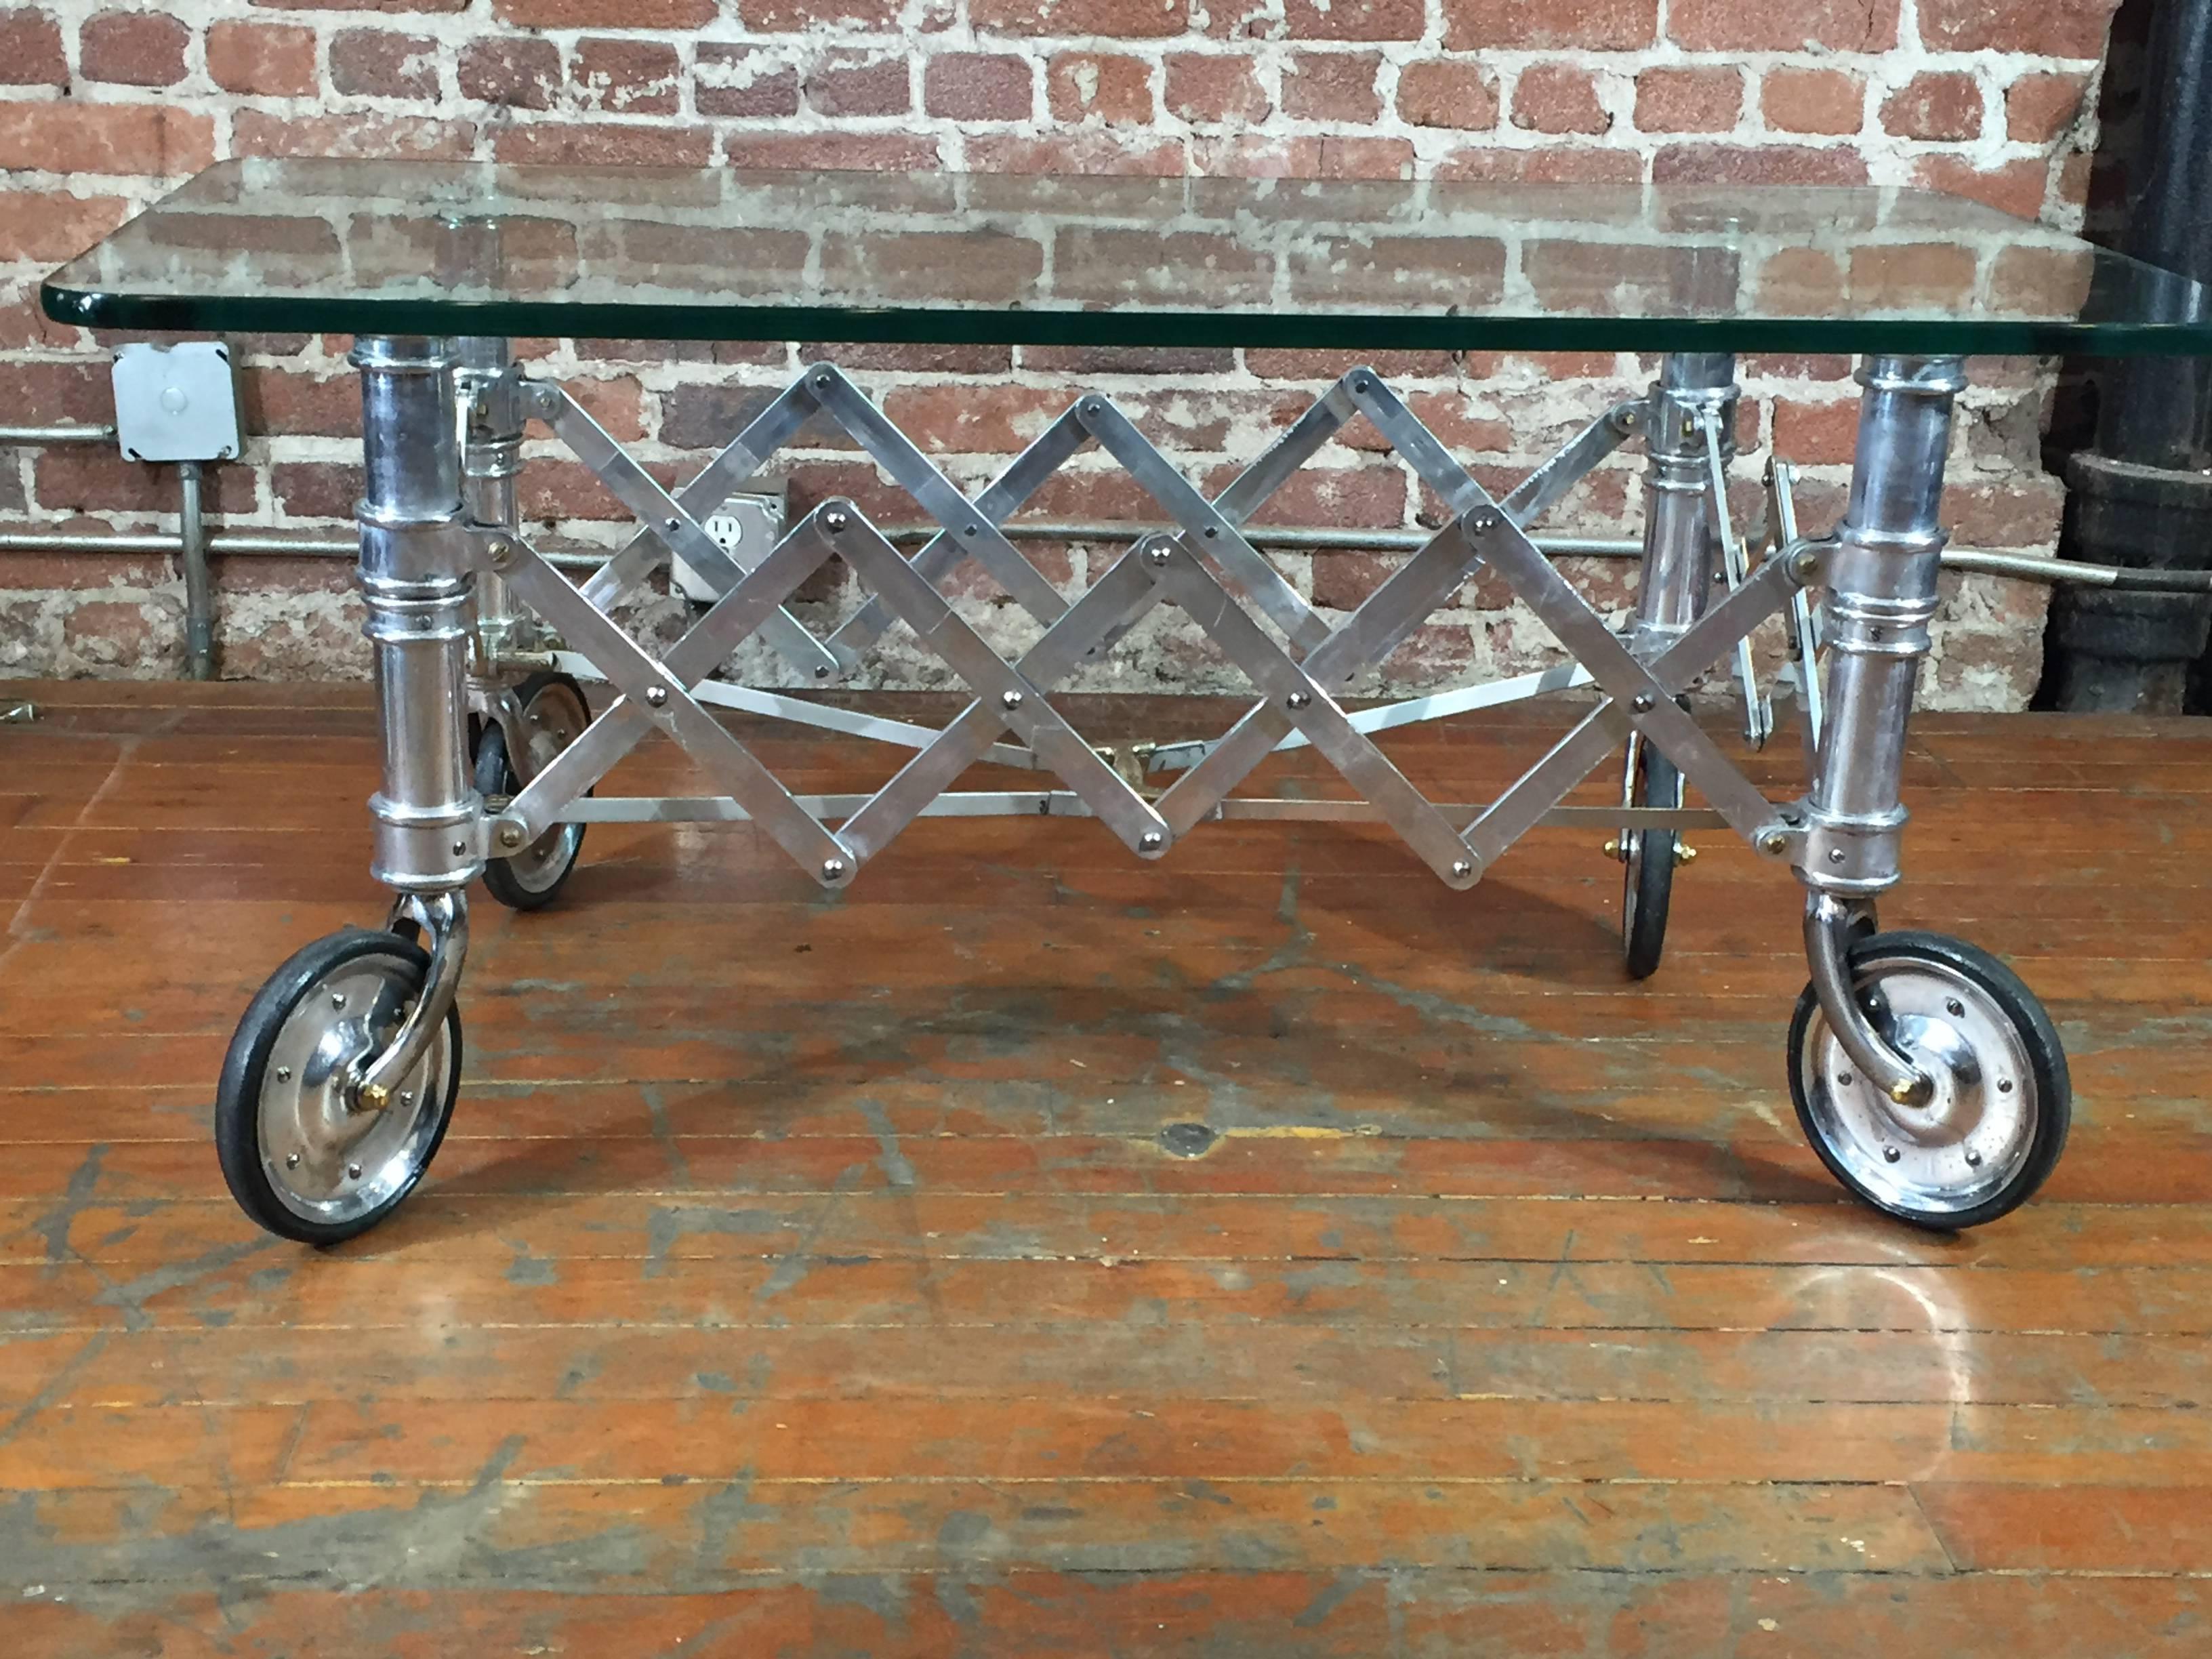 Antique casket stand reimagined as a decorative and unusual cocktail table. This beauty is bound to get the conversation rolling.